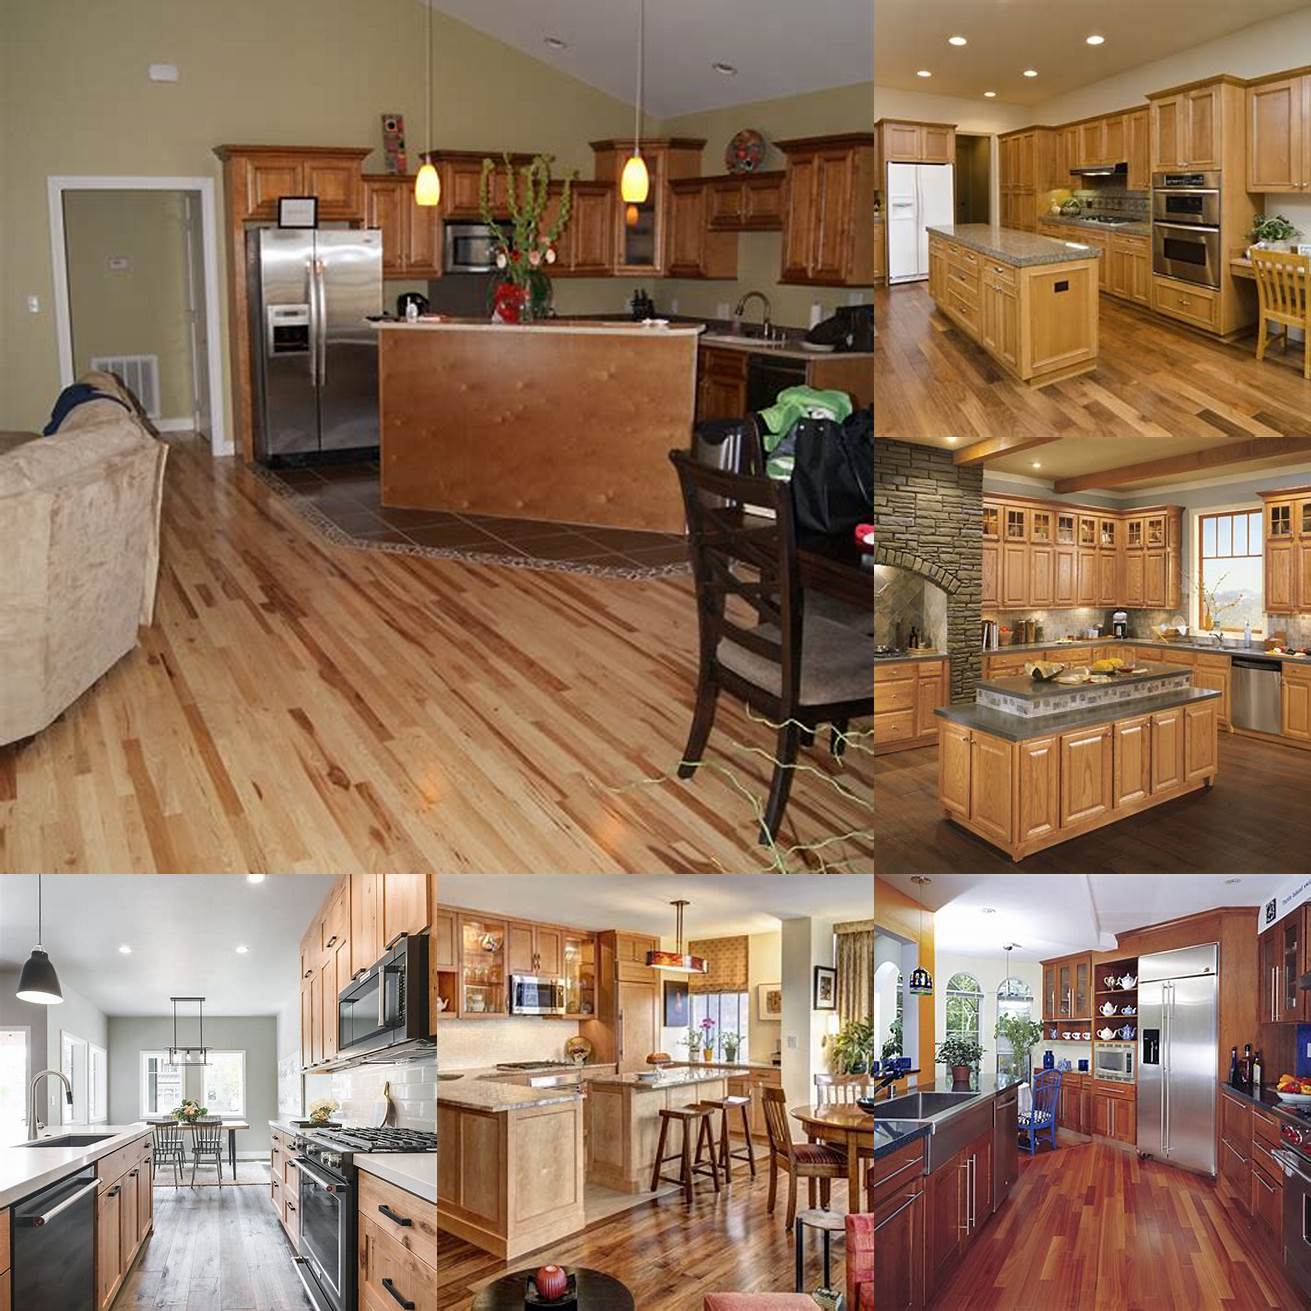 Wooden cabinets and flooring